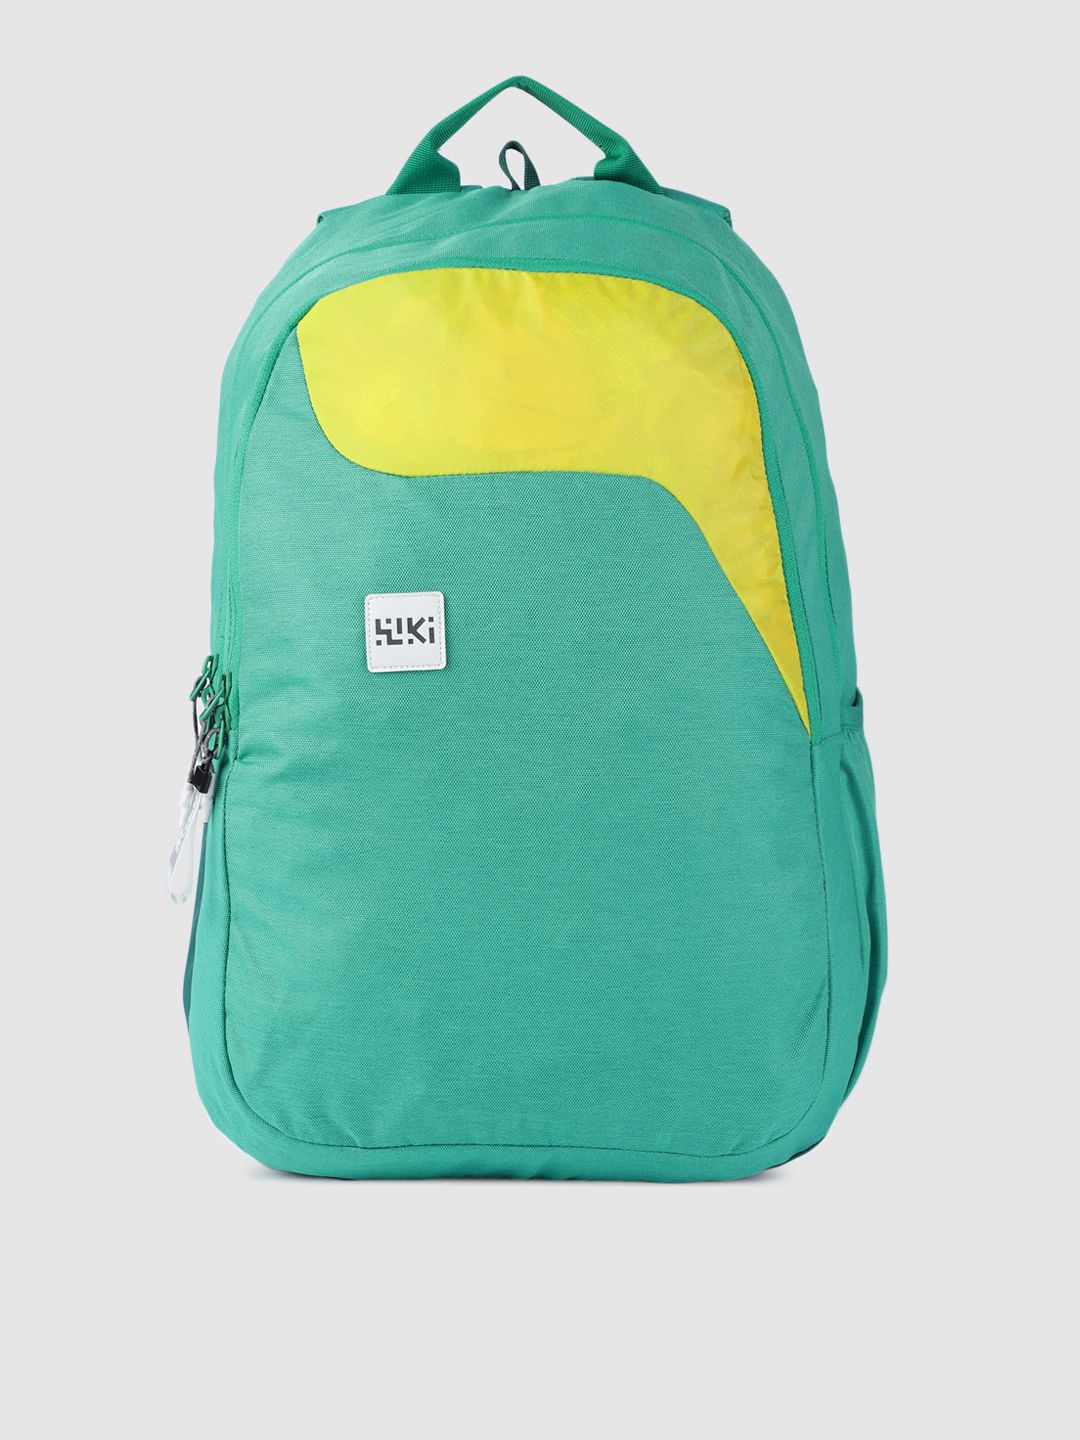 Wildcraft Unisex Sea Green & Yellow Colourblocked WIKI PACK 1 Backpack Price in India